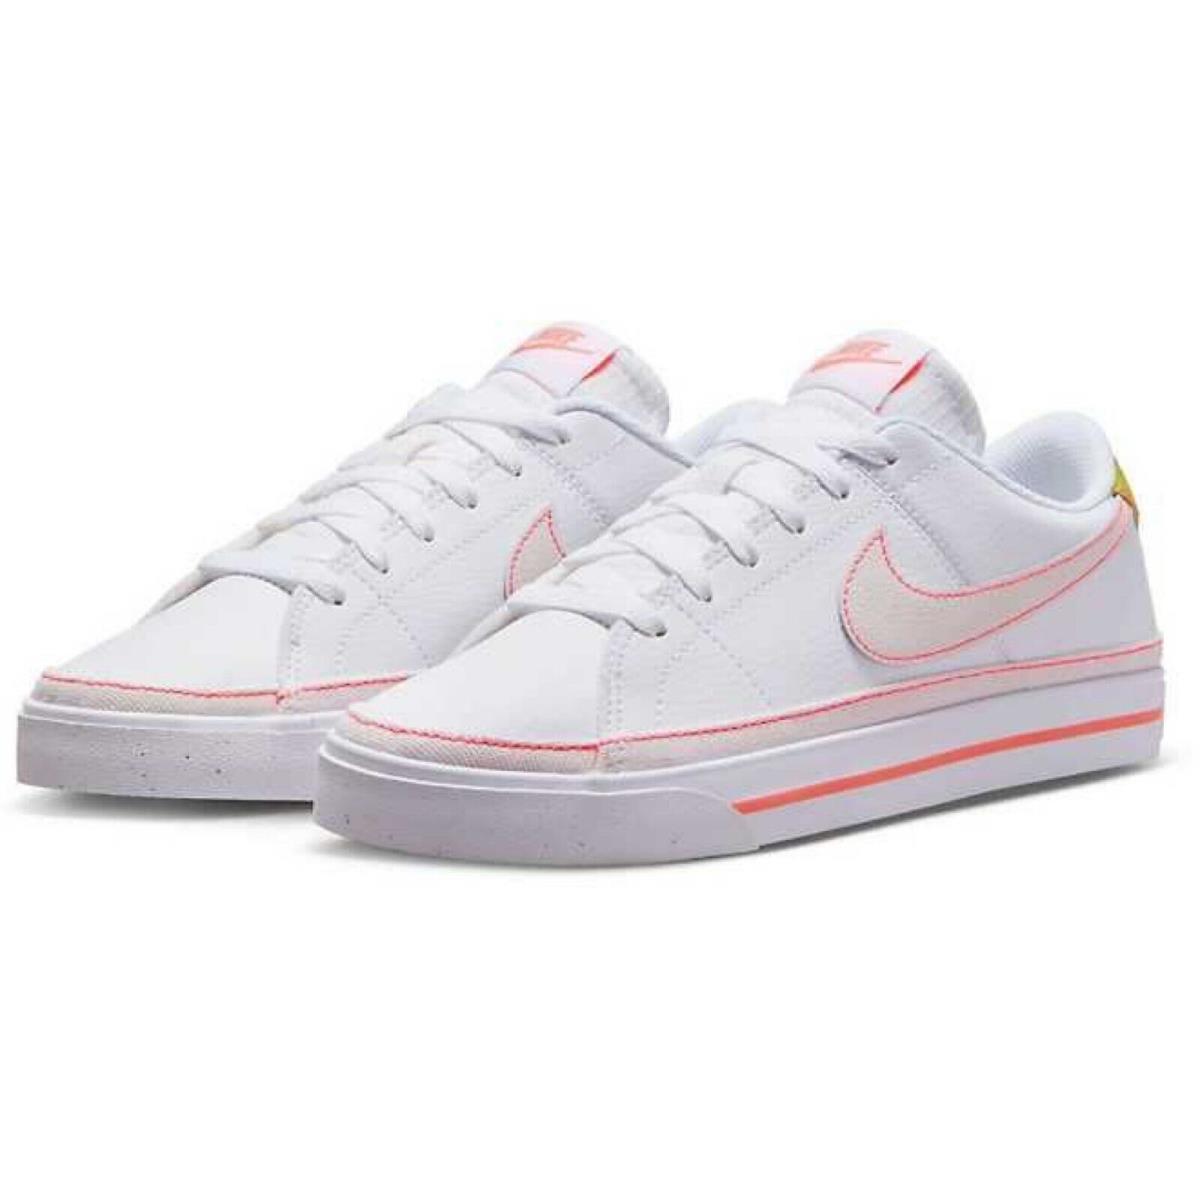 Nike shoes Court Legacy - White , White/Pink Punch/Green Cactus Manufacturer 9